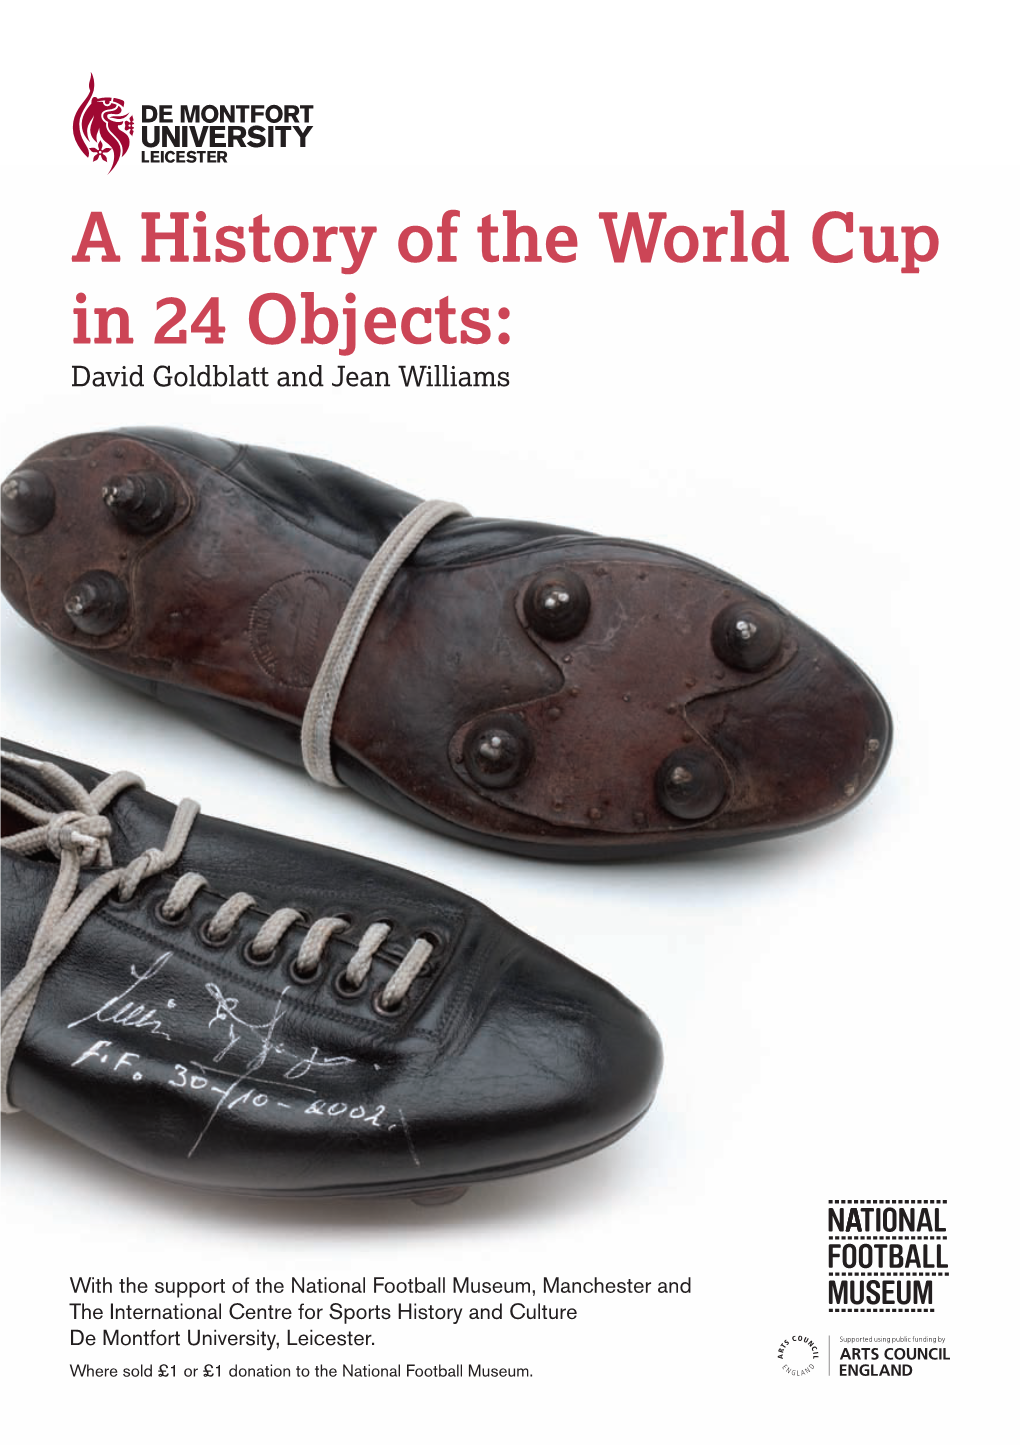 A History of the World Cup in 24 Objects: David Goldblatt and Jean Williams